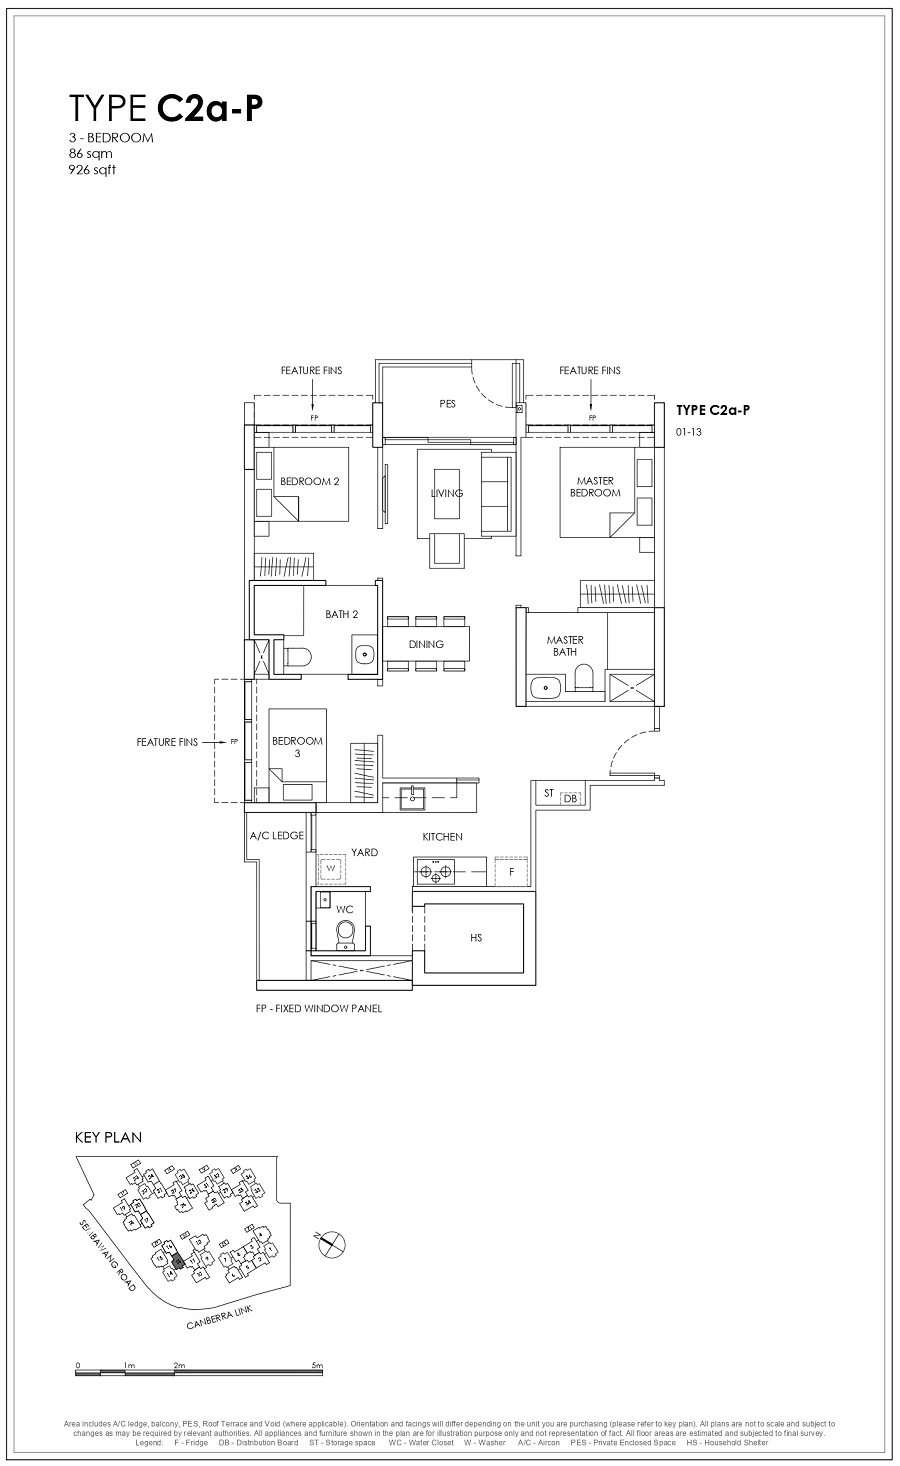 Provence Residence EC 3BR Type C2a-P 86_926